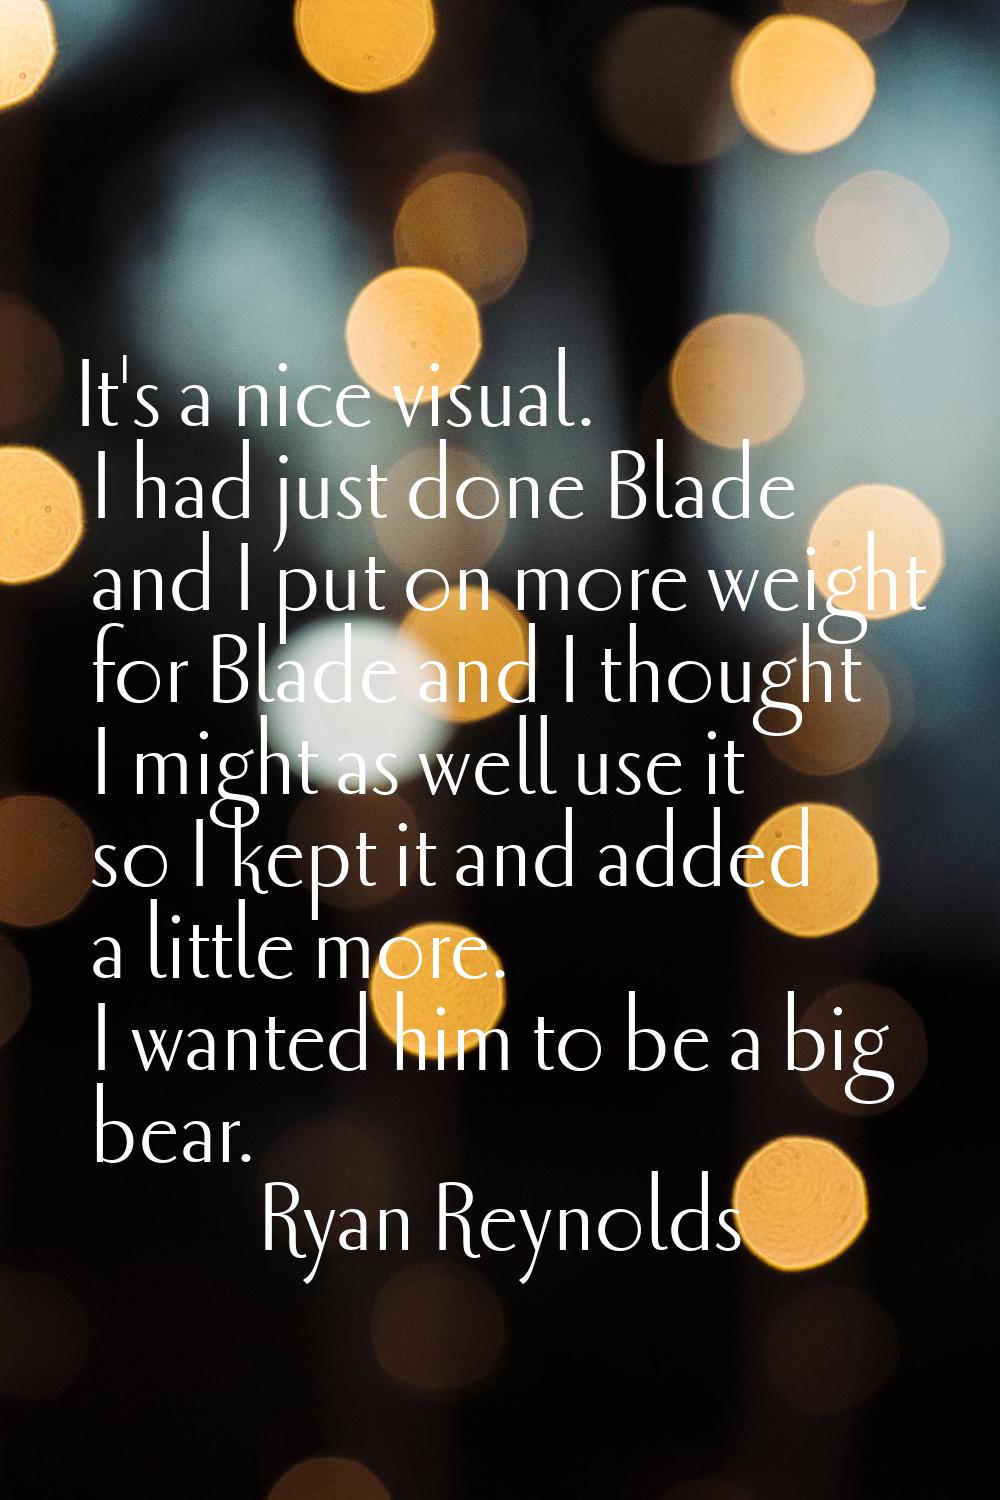 It's a nice visual. I had just done Blade and I put on more weight for Blade and I thought I might 